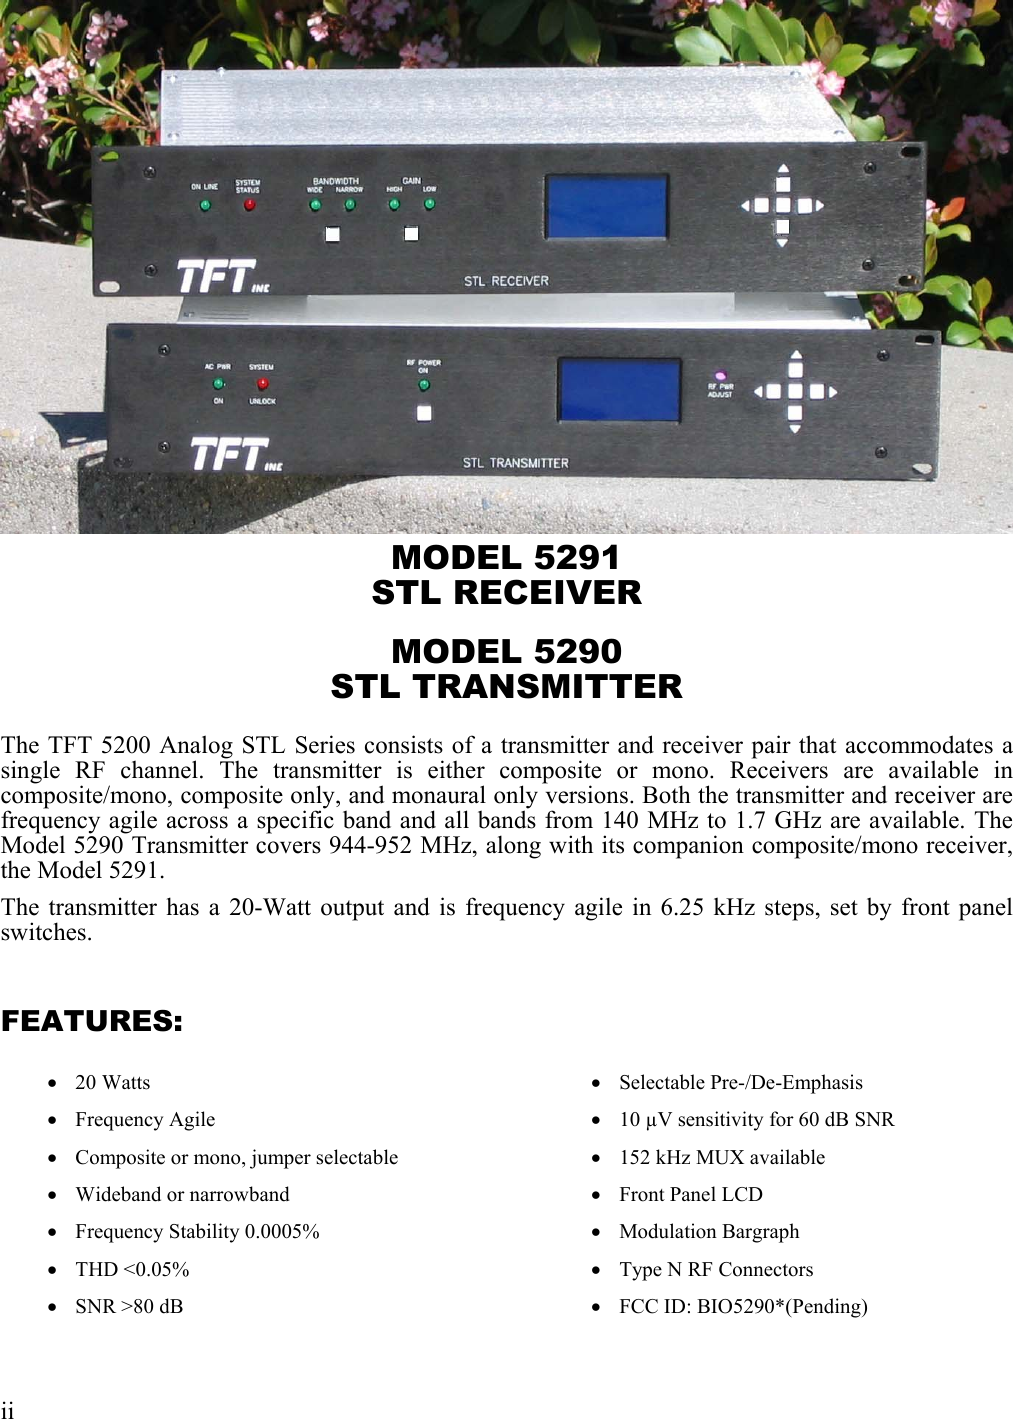  MODEL 5291 STL RECEIVER MODEL 5290 STL TRANSMITTER The TFT 5200 Analog STL Series consists of a transmitter and receiver pair that accommodates a single RF channel. The transmitter is either composite or mono. Receivers are available in composite/mono, composite only, and monaural only versions. Both the transmitter and receiver are frequency agile across a specific band and all bands from 140 MHz to 1.7 GHz are available. The Model 5290 Transmitter covers 944-952 MHz, along with its companion composite/mono receiver, the Model 5291. The transmitter has a 20-Watt output and is frequency agile in 6.25 kHz steps, set by front panel switches.  FEATURES:  •  20 Watts •  Frequency Agile •  Composite or mono, jumper selectable •  Wideband or narrowband •  Frequency Stability 0.0005% •  THD &lt;0.05% •  SNR &gt;80 dB •  Selectable Pre-/De-Emphasis •  10 µV sensitivity for 60 dB SNR •  152 kHz MUX available •  Front Panel LCD •  Modulation Bargraph •  Type N RF Connectors •  FCC ID: BIO5290*(Pending)  ii